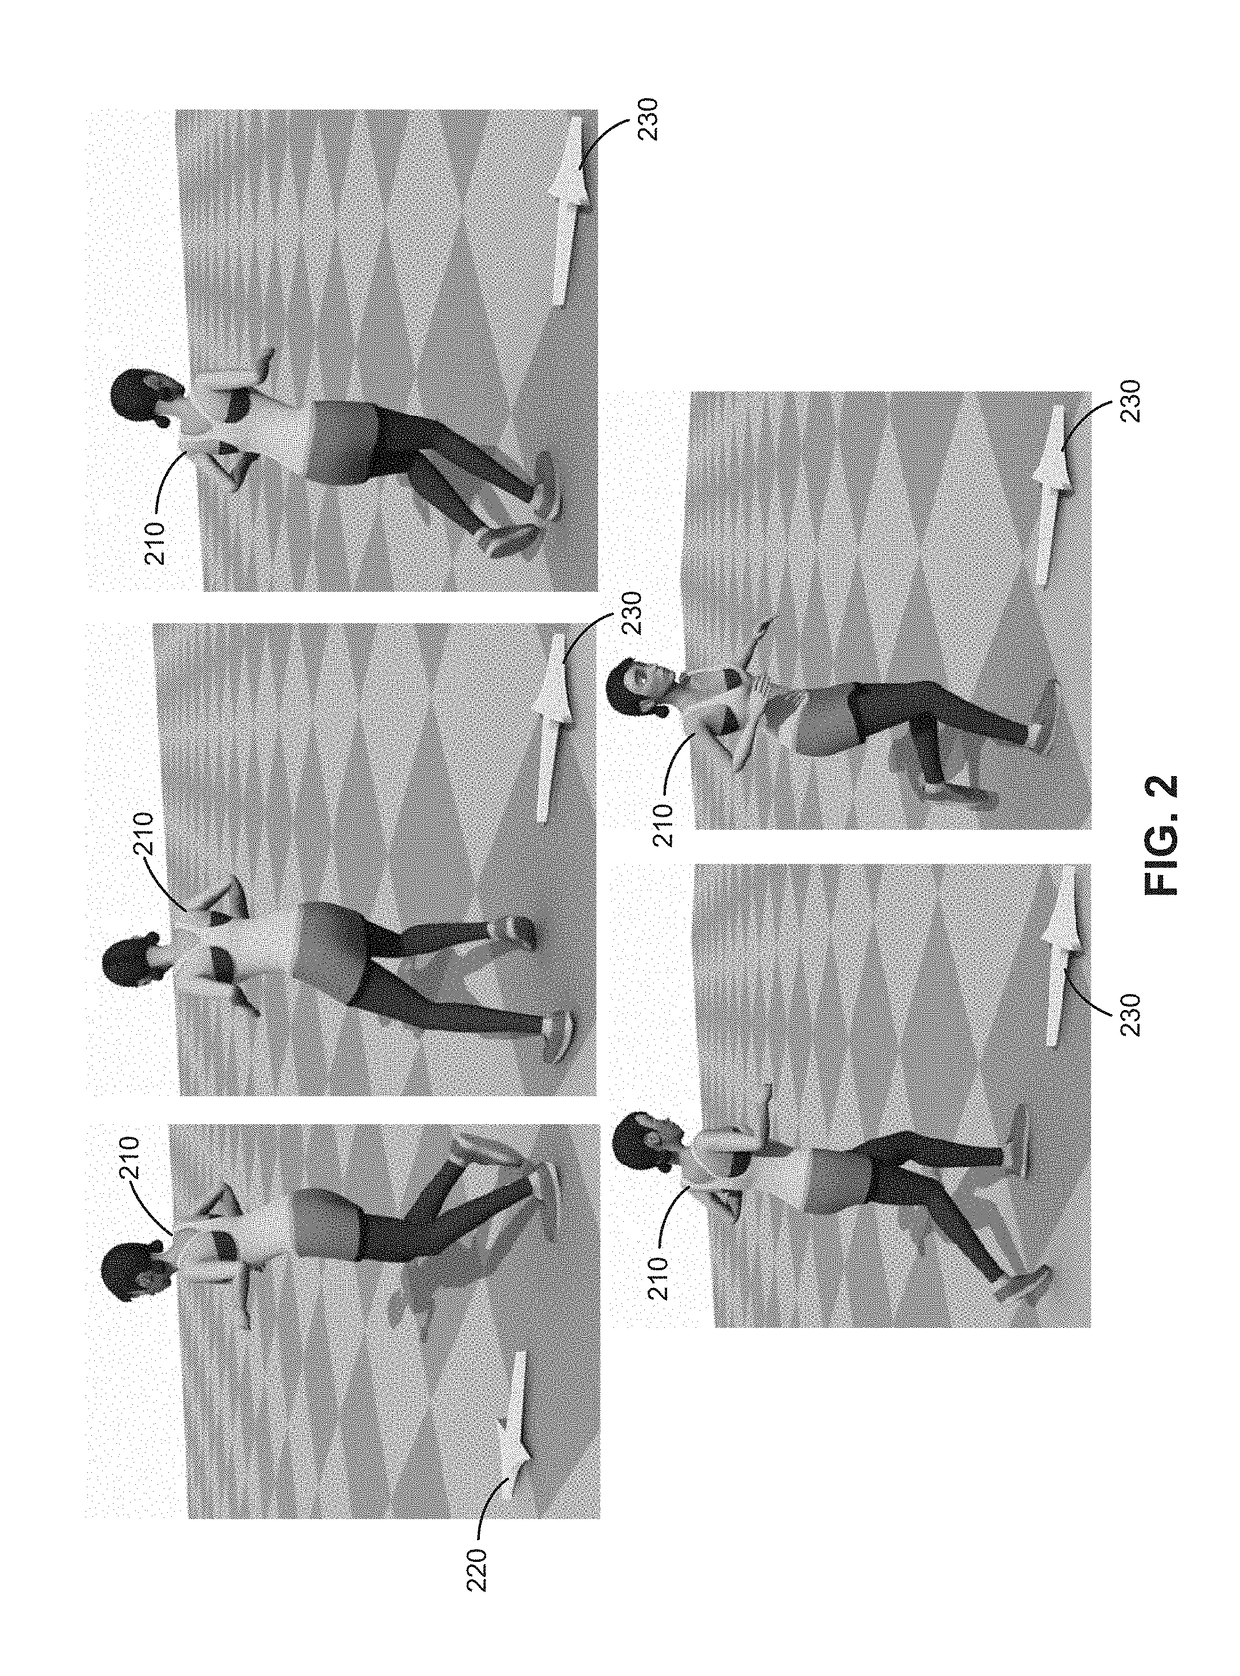 Learning to schedule control fragments for physics-based character simulation and robots using deep q-learning